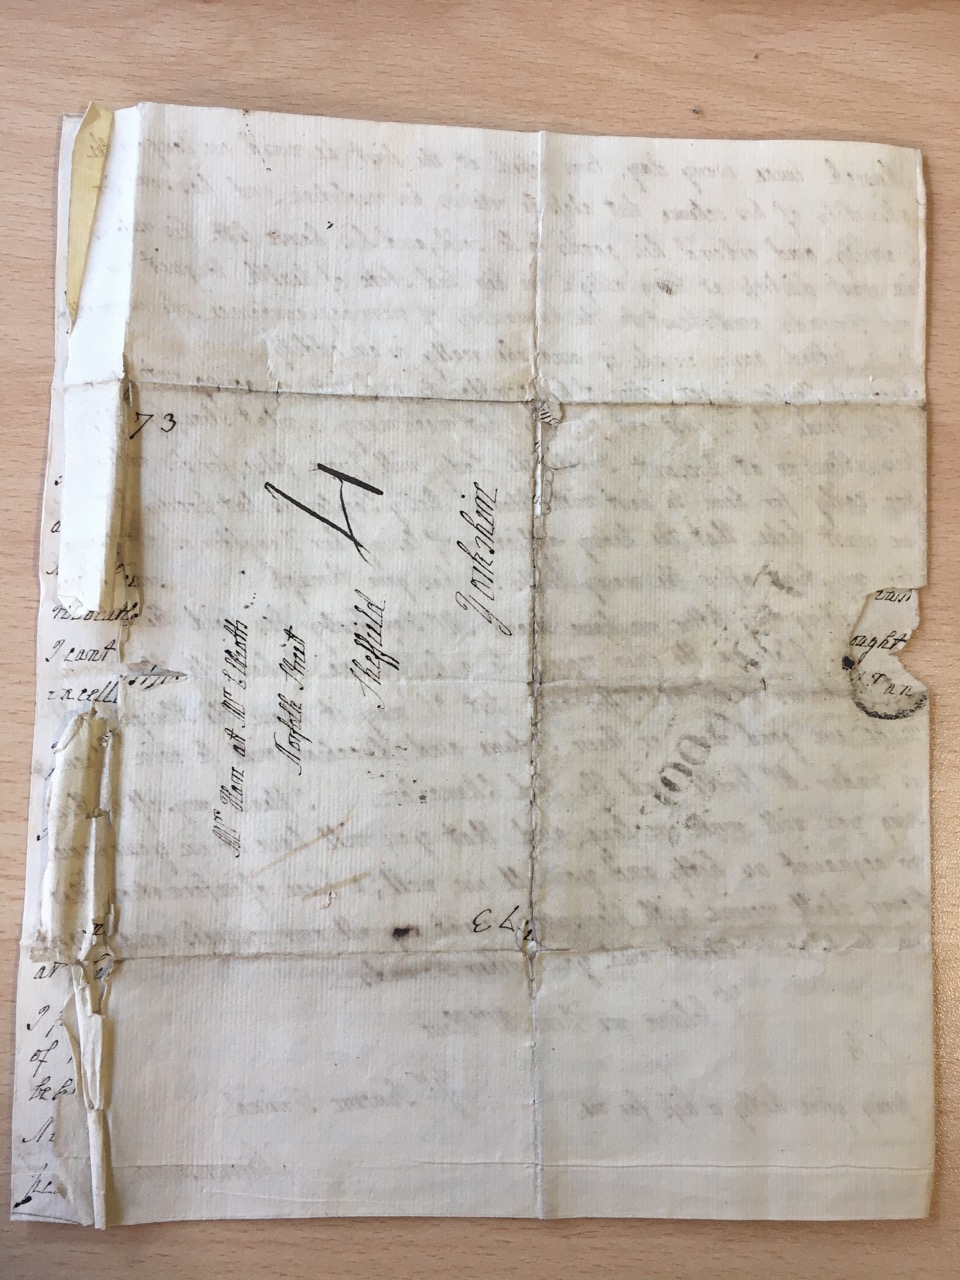 Image #4 of letter: J[enny[ Brownsword to Ann Hare, 7 June 1773